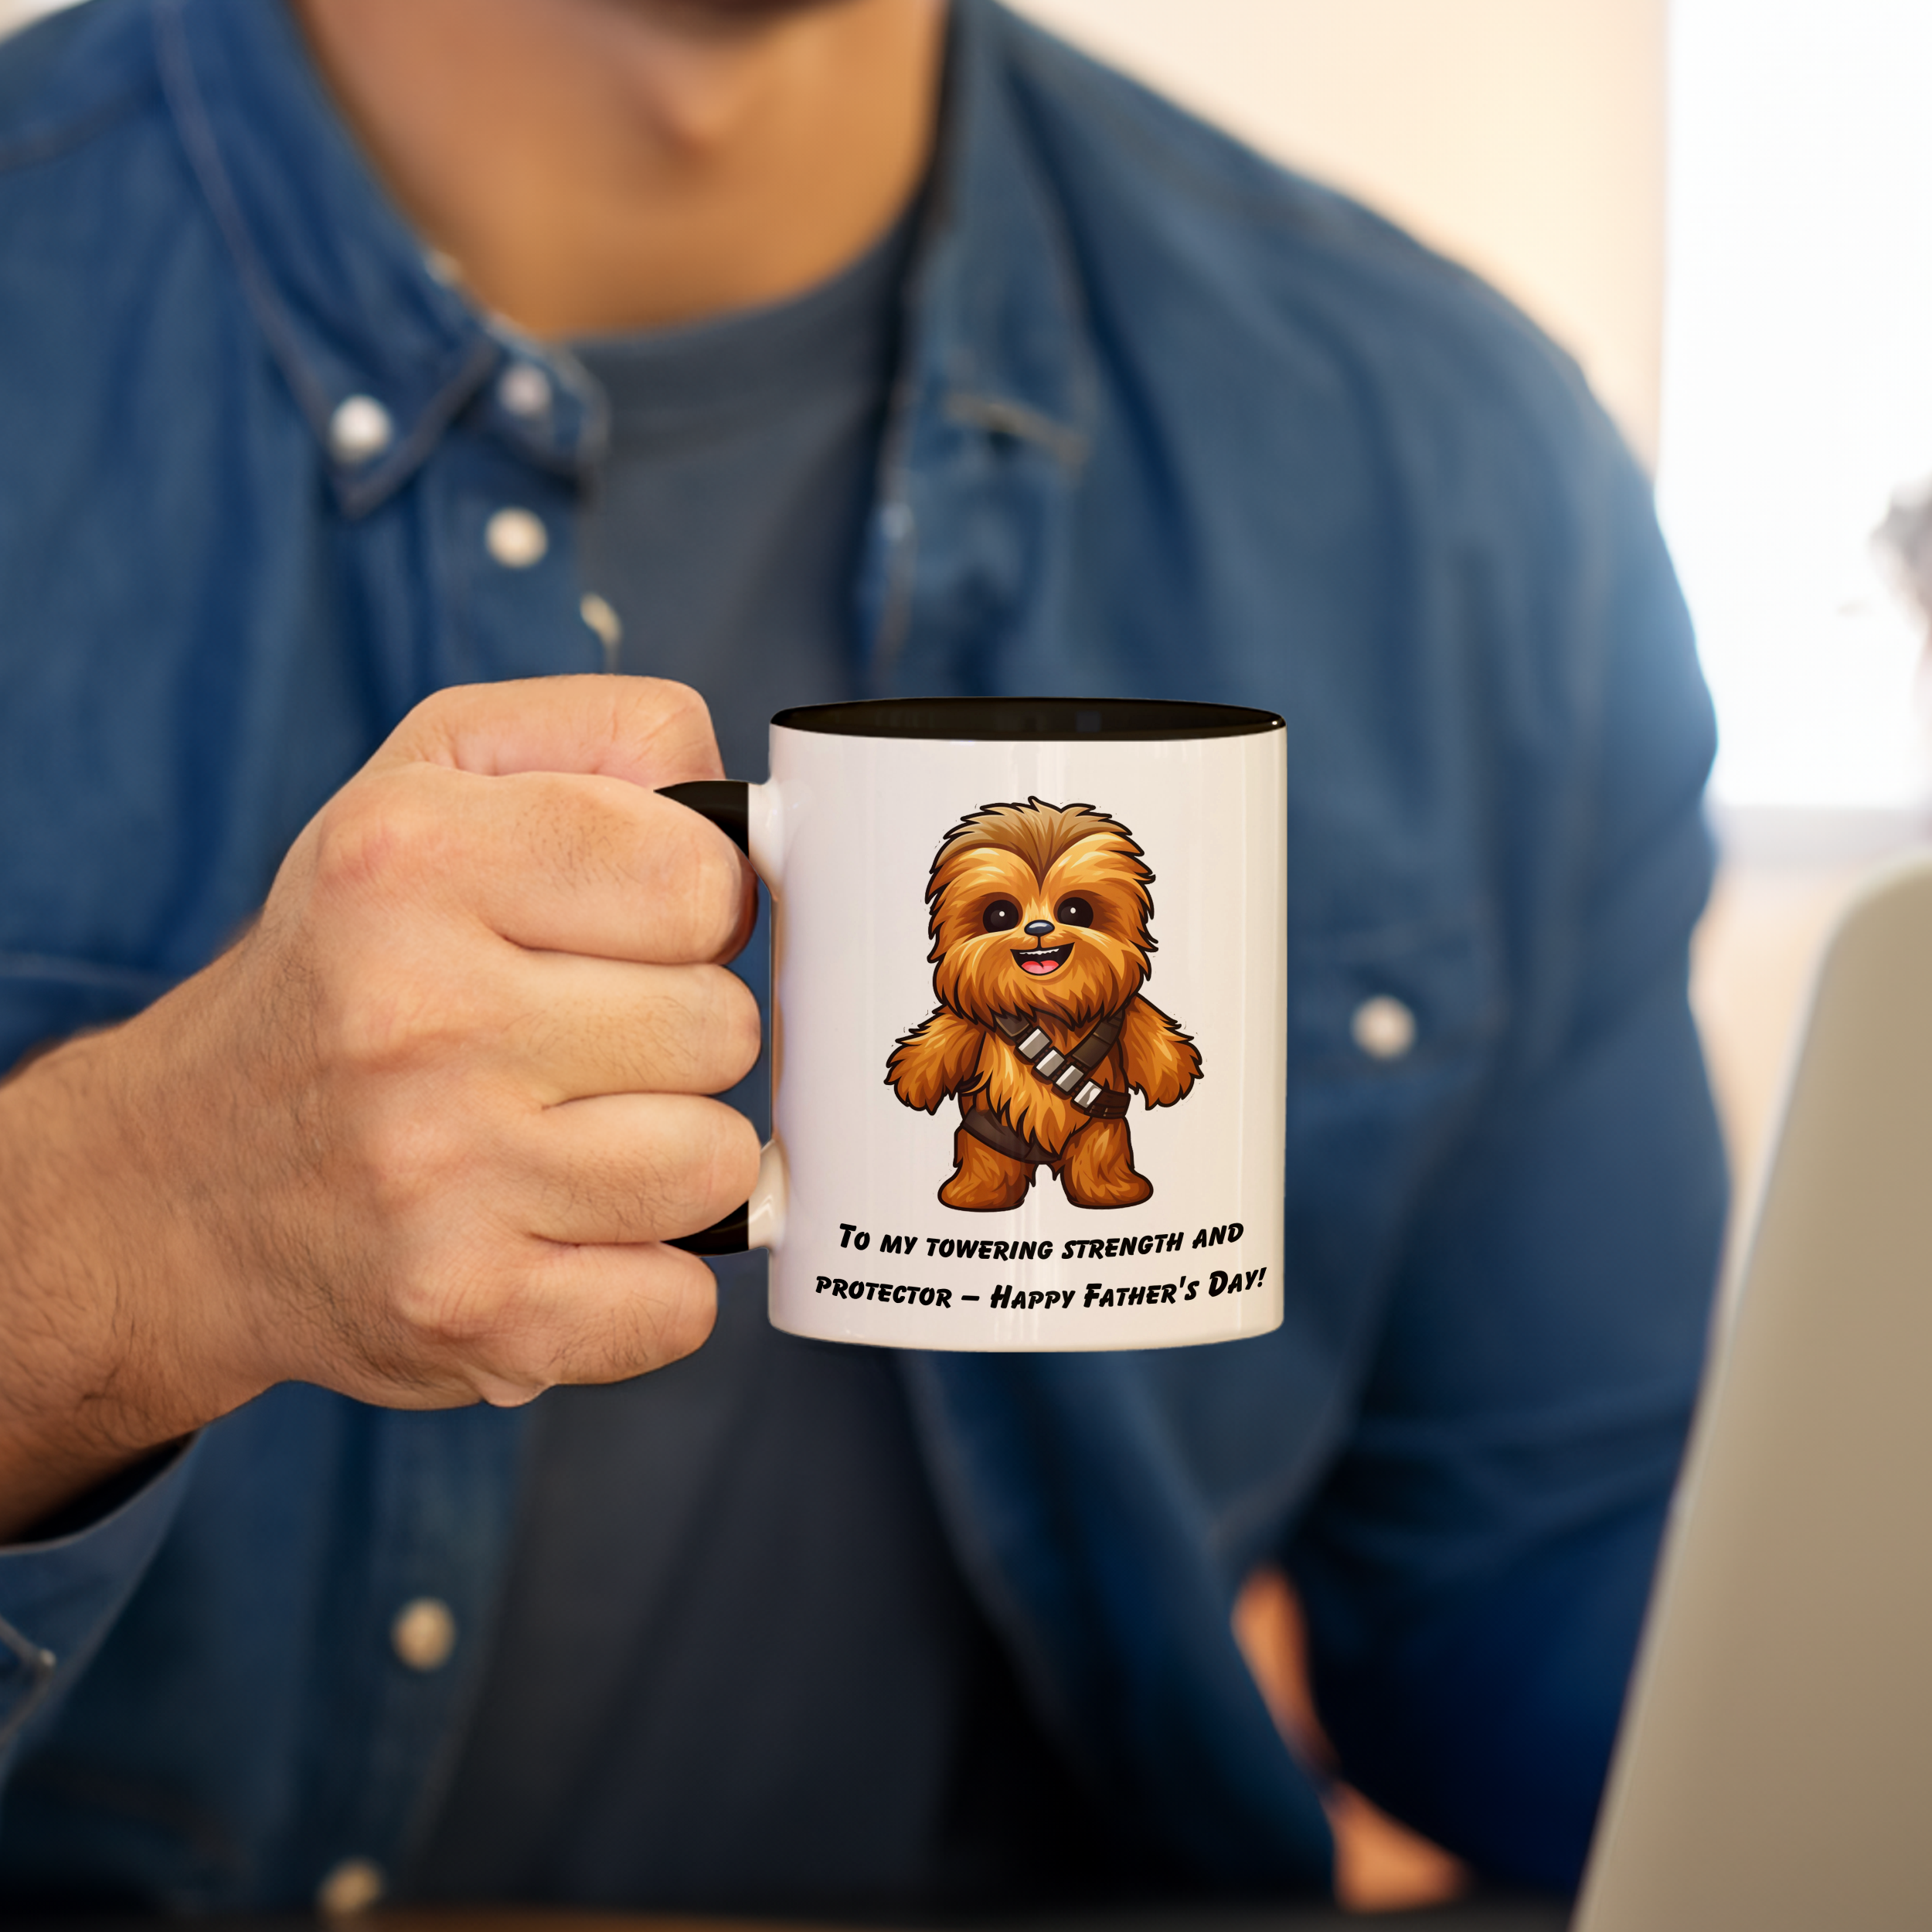 Fuzzy Galaxy Pilot Mug - Father's Day Space Hero Coffee Cup, Brown Co-Pilot Ceramic Mug with Color Accent, Dad's Cosmic Companion Drinkware